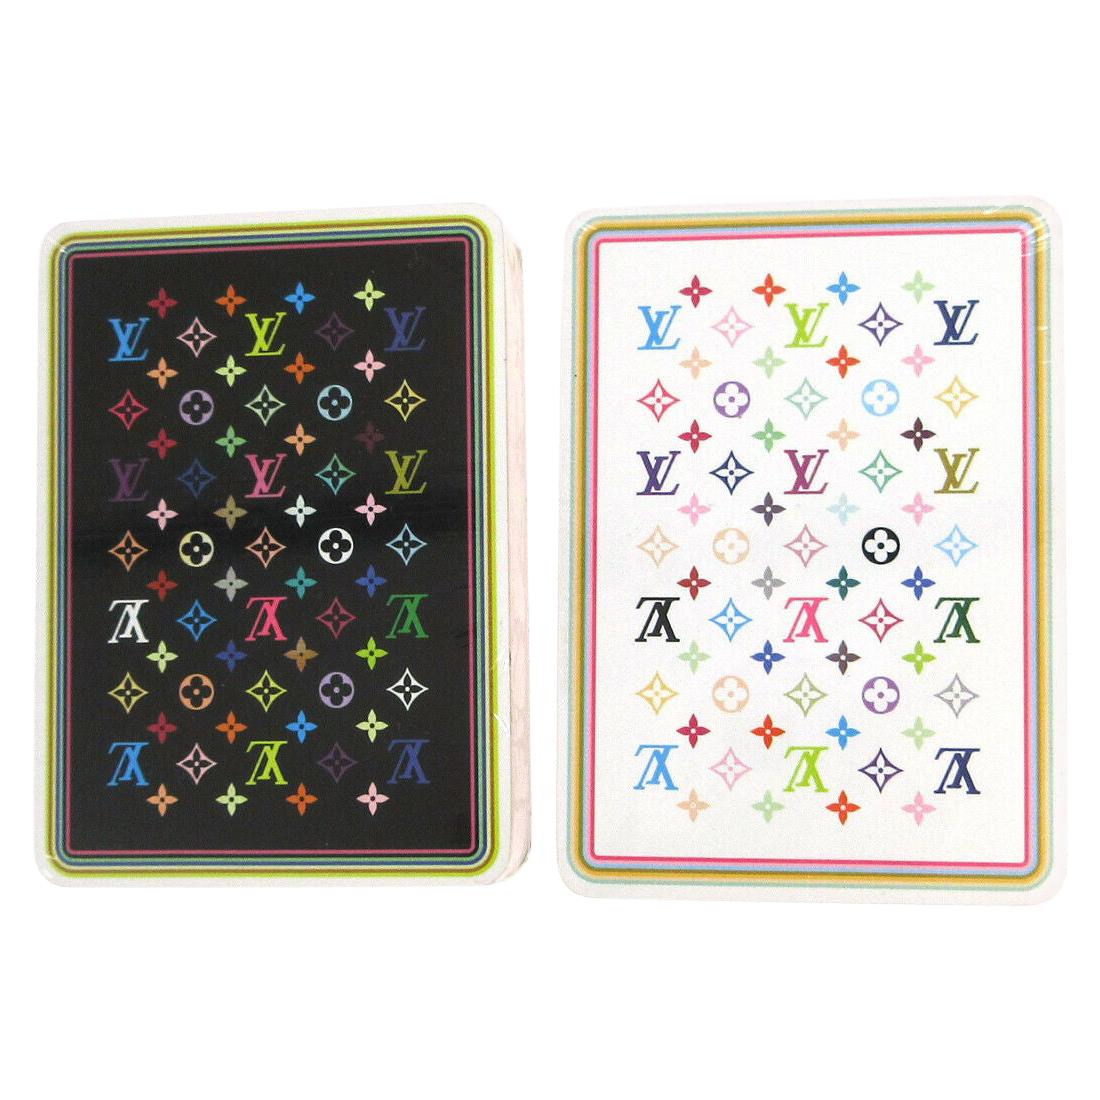 Louis Vuitton Monogram Multicolor White Black Novelty Card Deck of Cards in Box